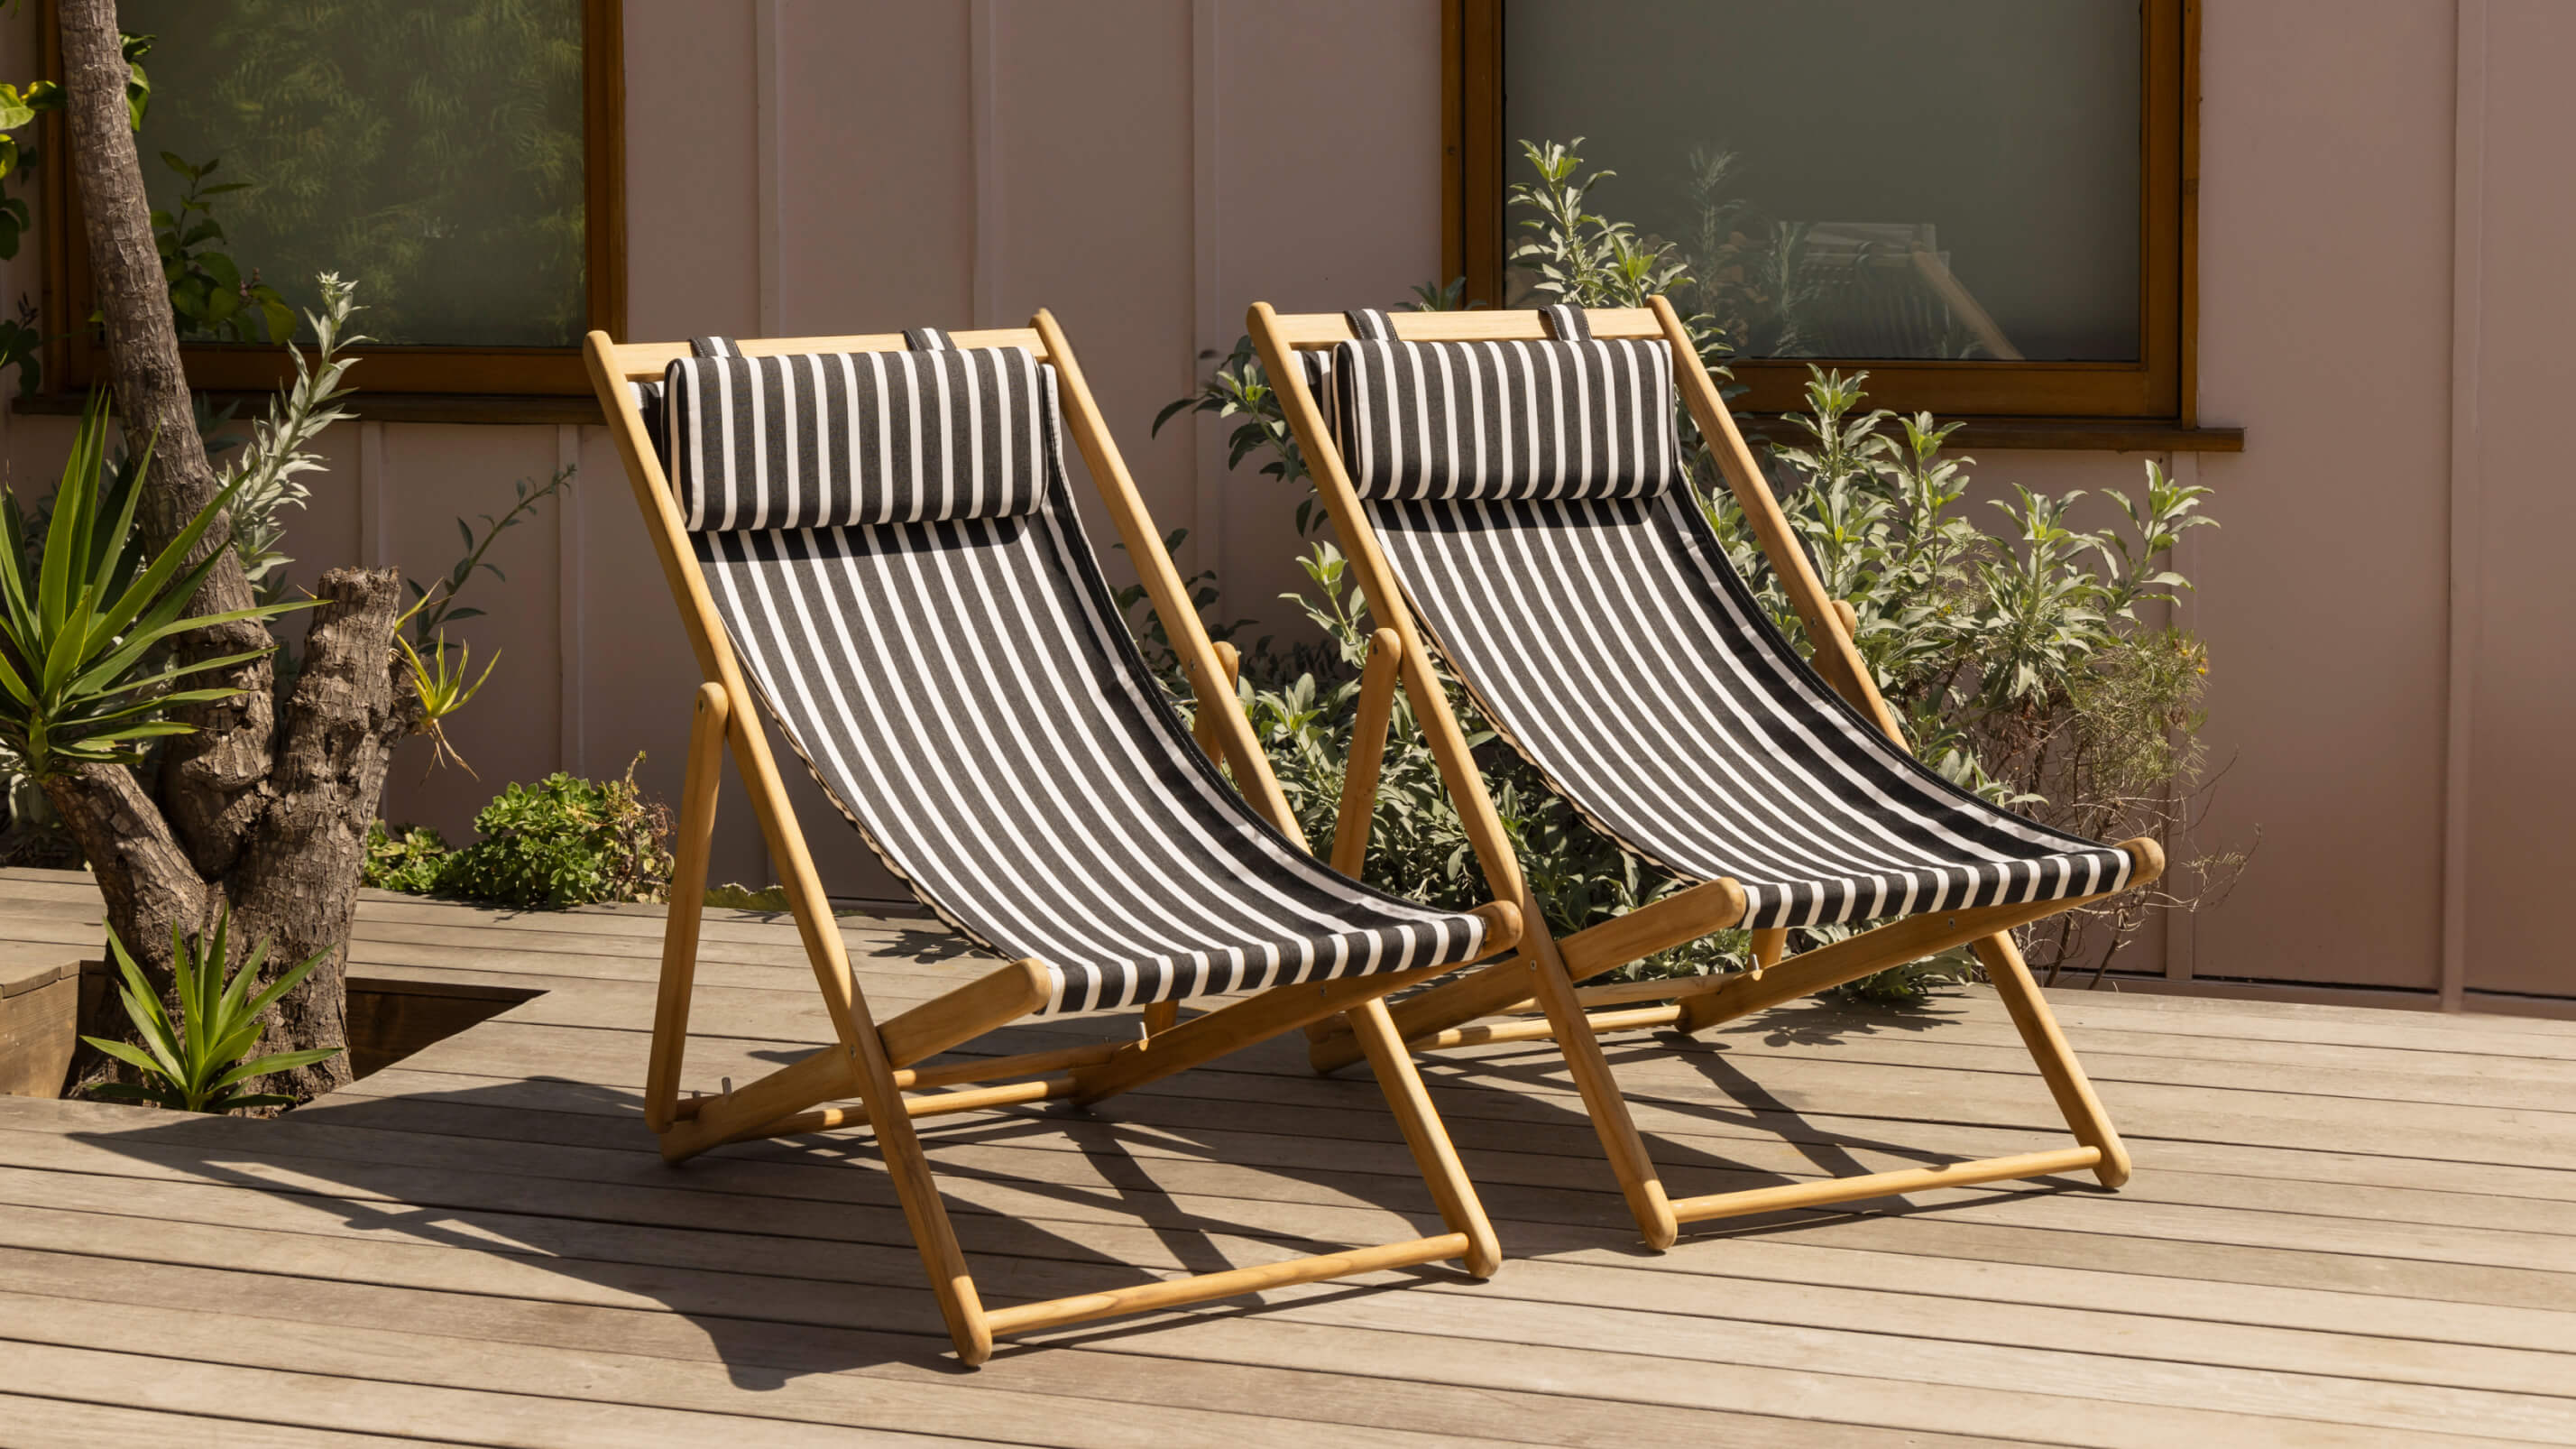 Settle In Outdoor Deck Chair, Black Sand - Image 3